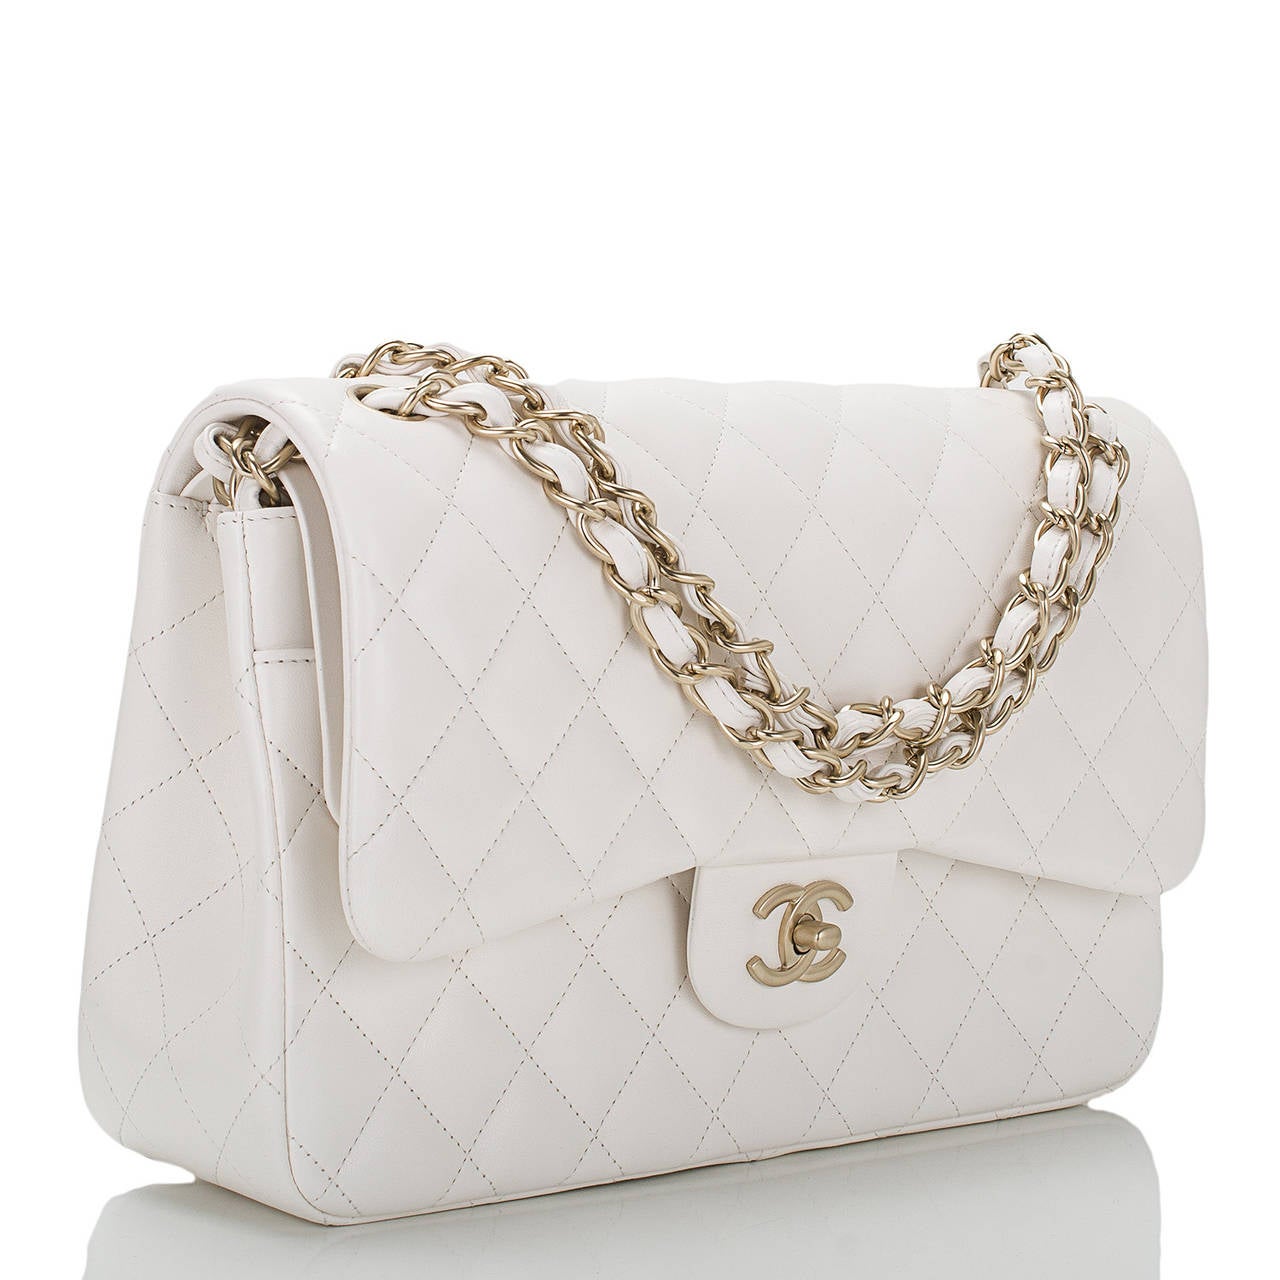 This limited edition Chanel Jumbo Classic double flap of white quilted lambskin leather and matte gold hardware features a front flap with signature CC turnlock closure, half moon back pocket, and an adjustable interwoven matte gold tone chain link